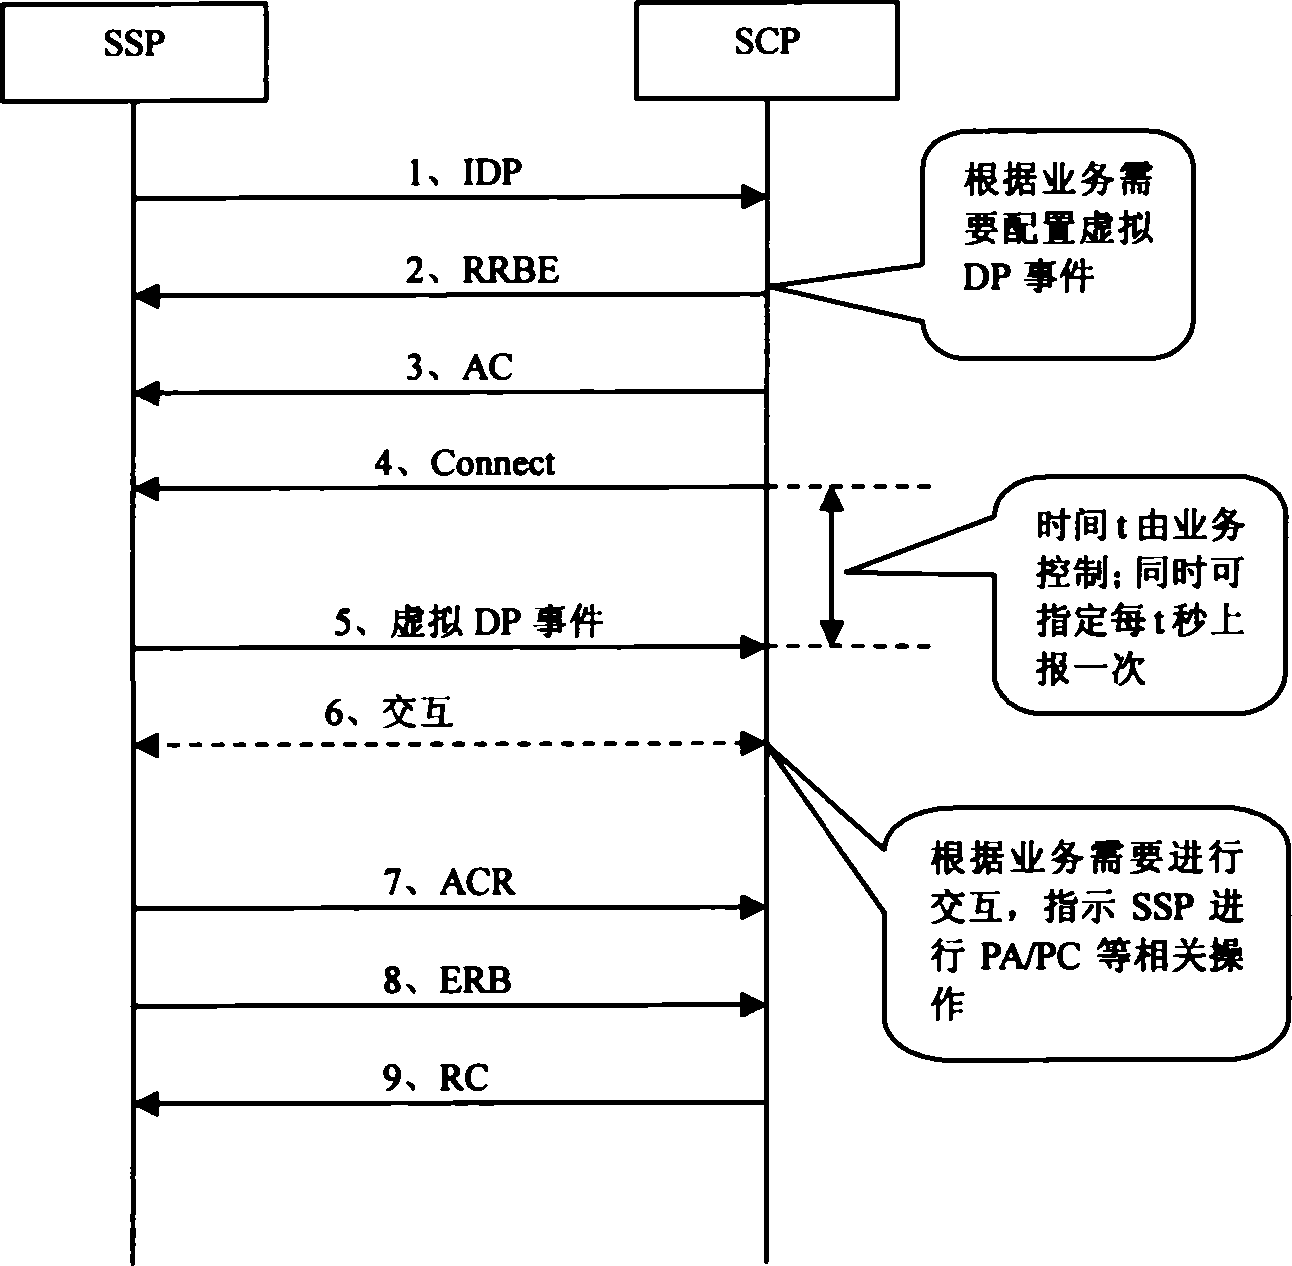 Method for enhancing control ability of business control point in speaking process